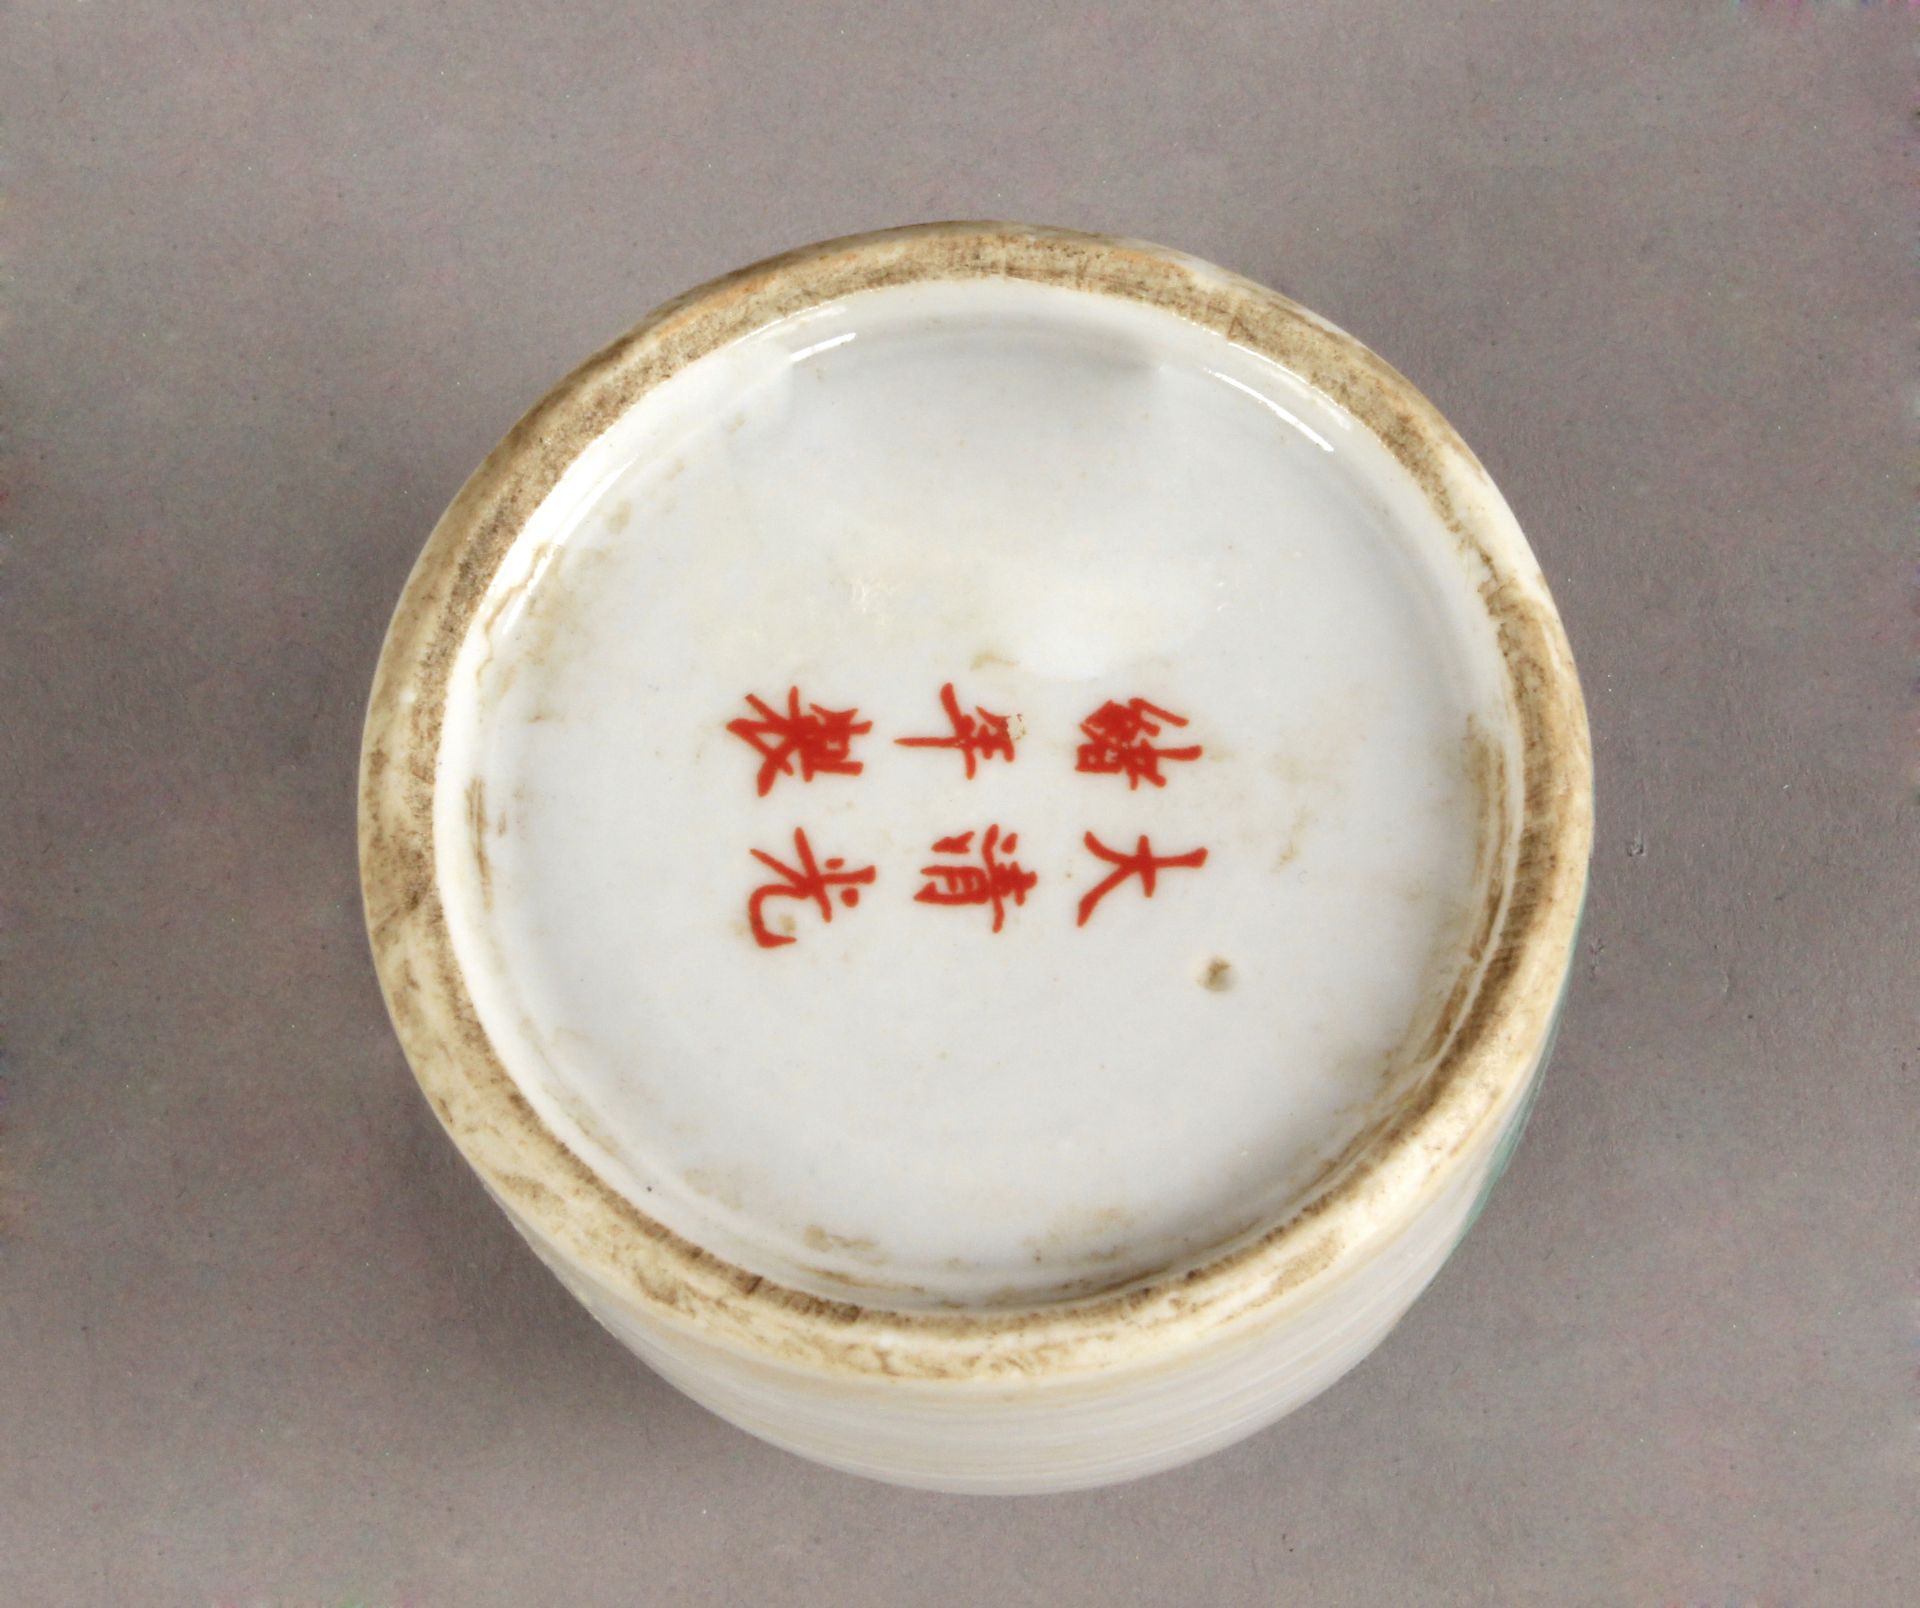 A 20th century Chinese porcelain brush pot - Image 2 of 3